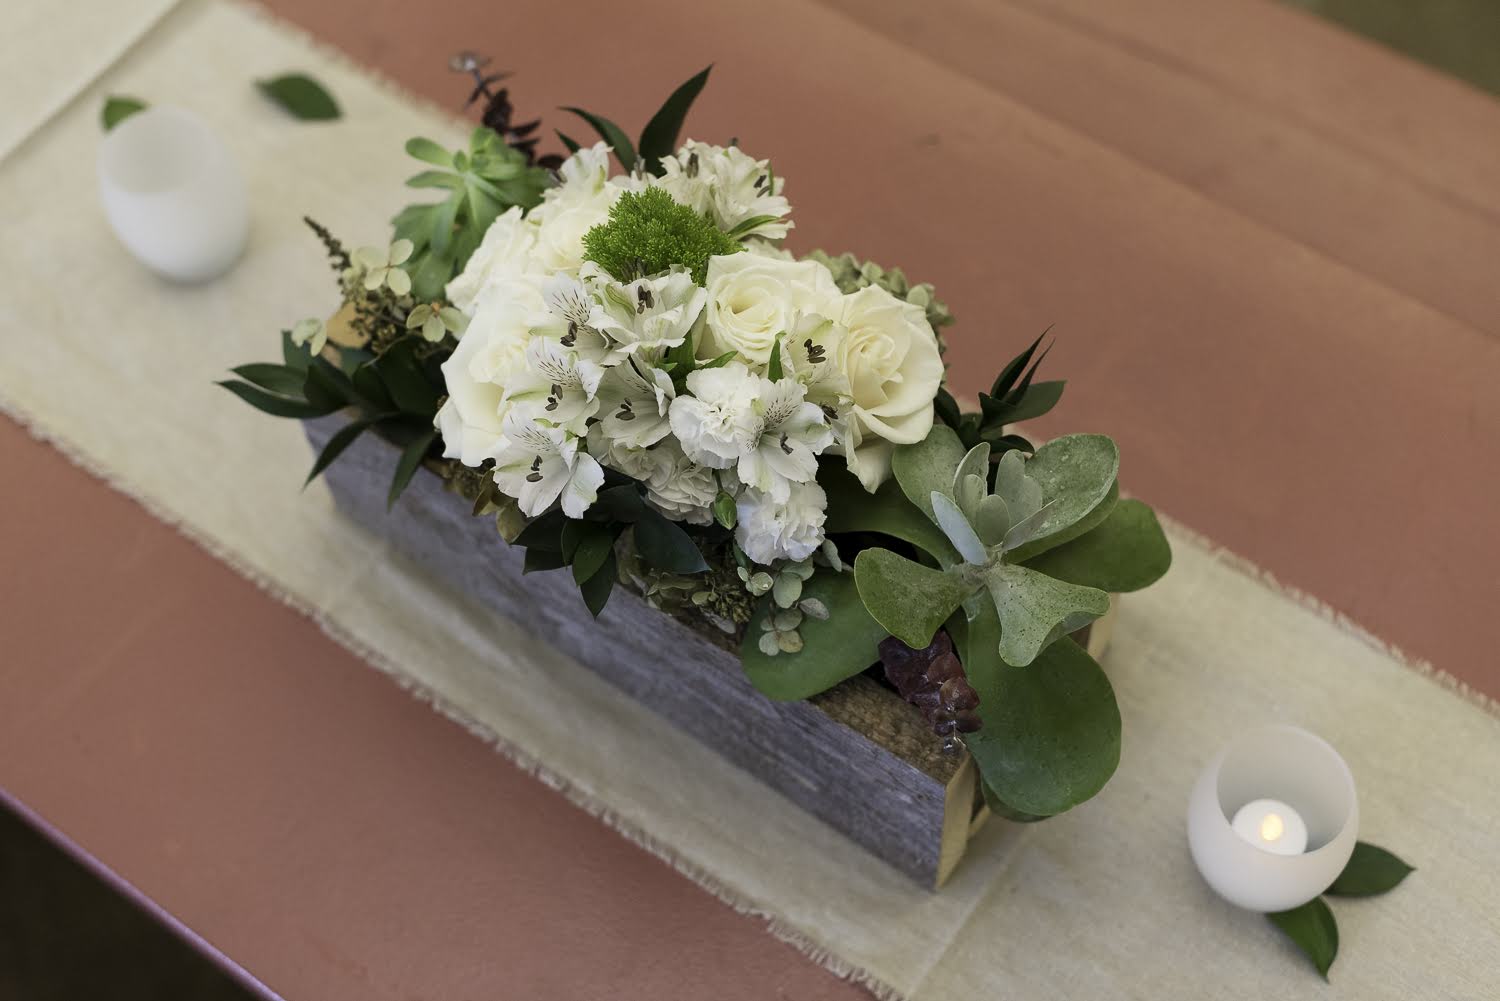 The flower-filled centerpiece made from rustic pine.